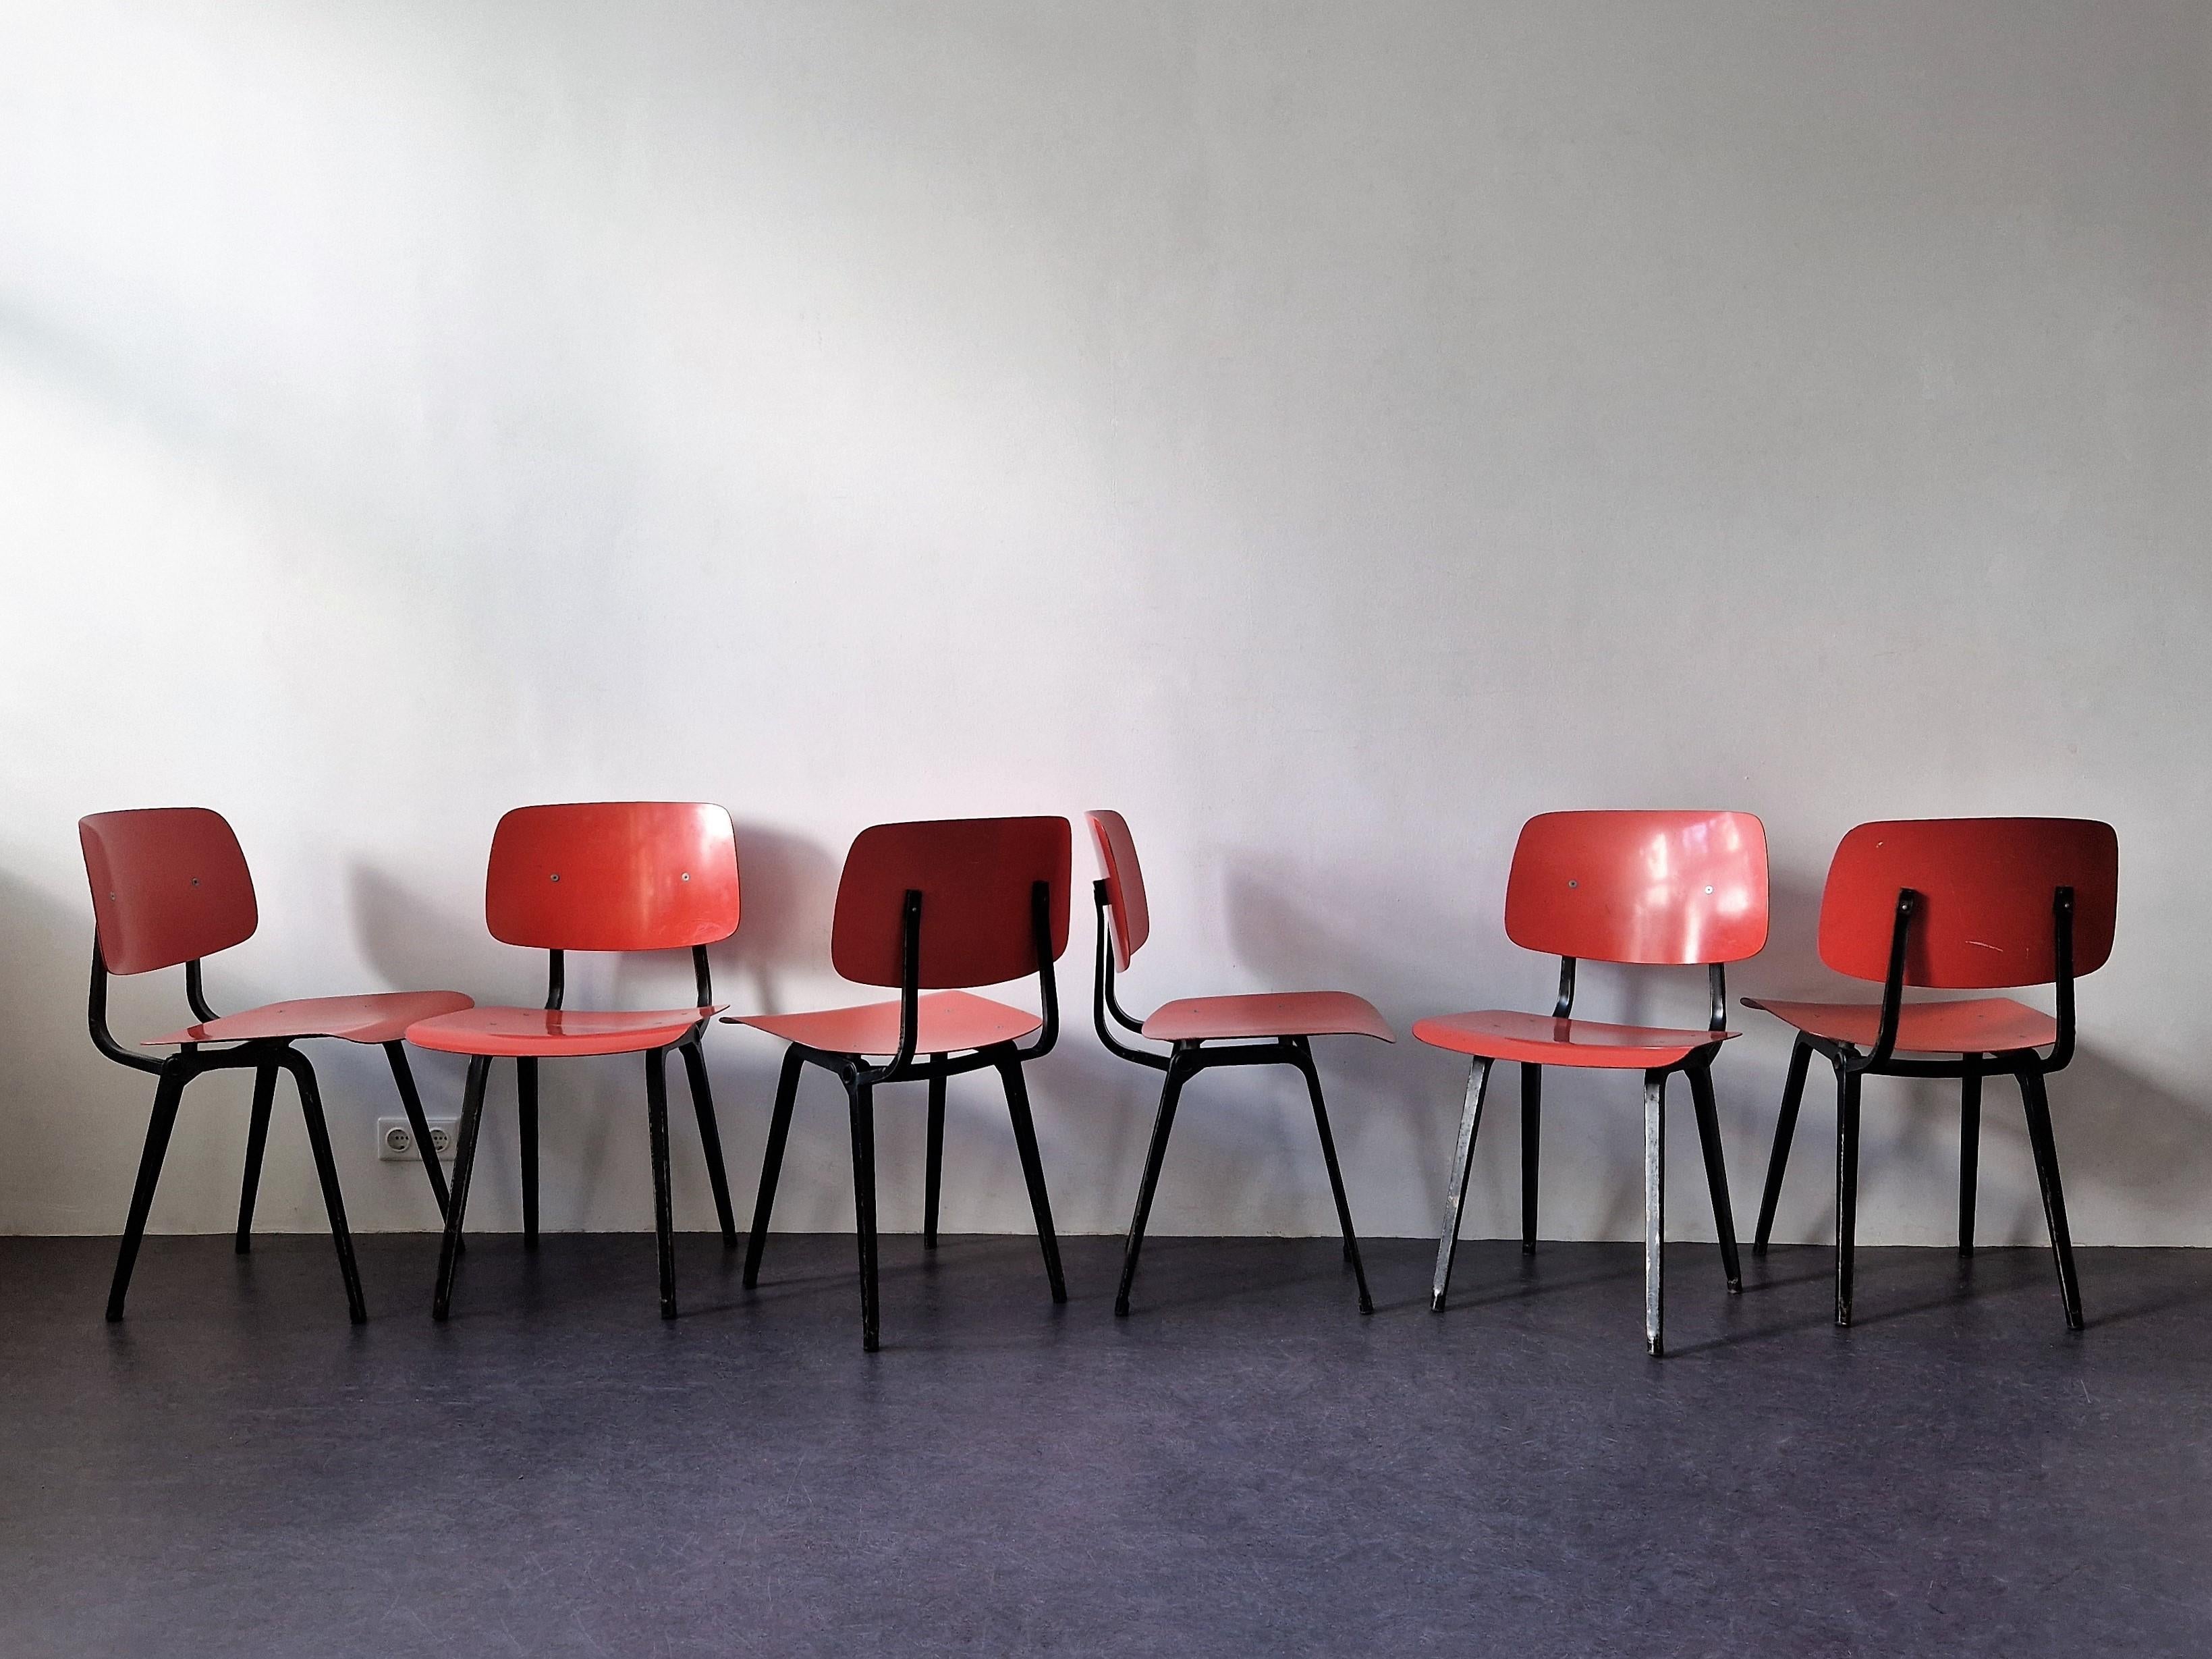 The 'Revolt' chair was designed by Friso Kramer for Ahrend de Cirkel. An award winning design that has become an icon of Dutch industrial design from the 1950's. This solid chair has a folded black metal base and a pink ciranol or synthetic